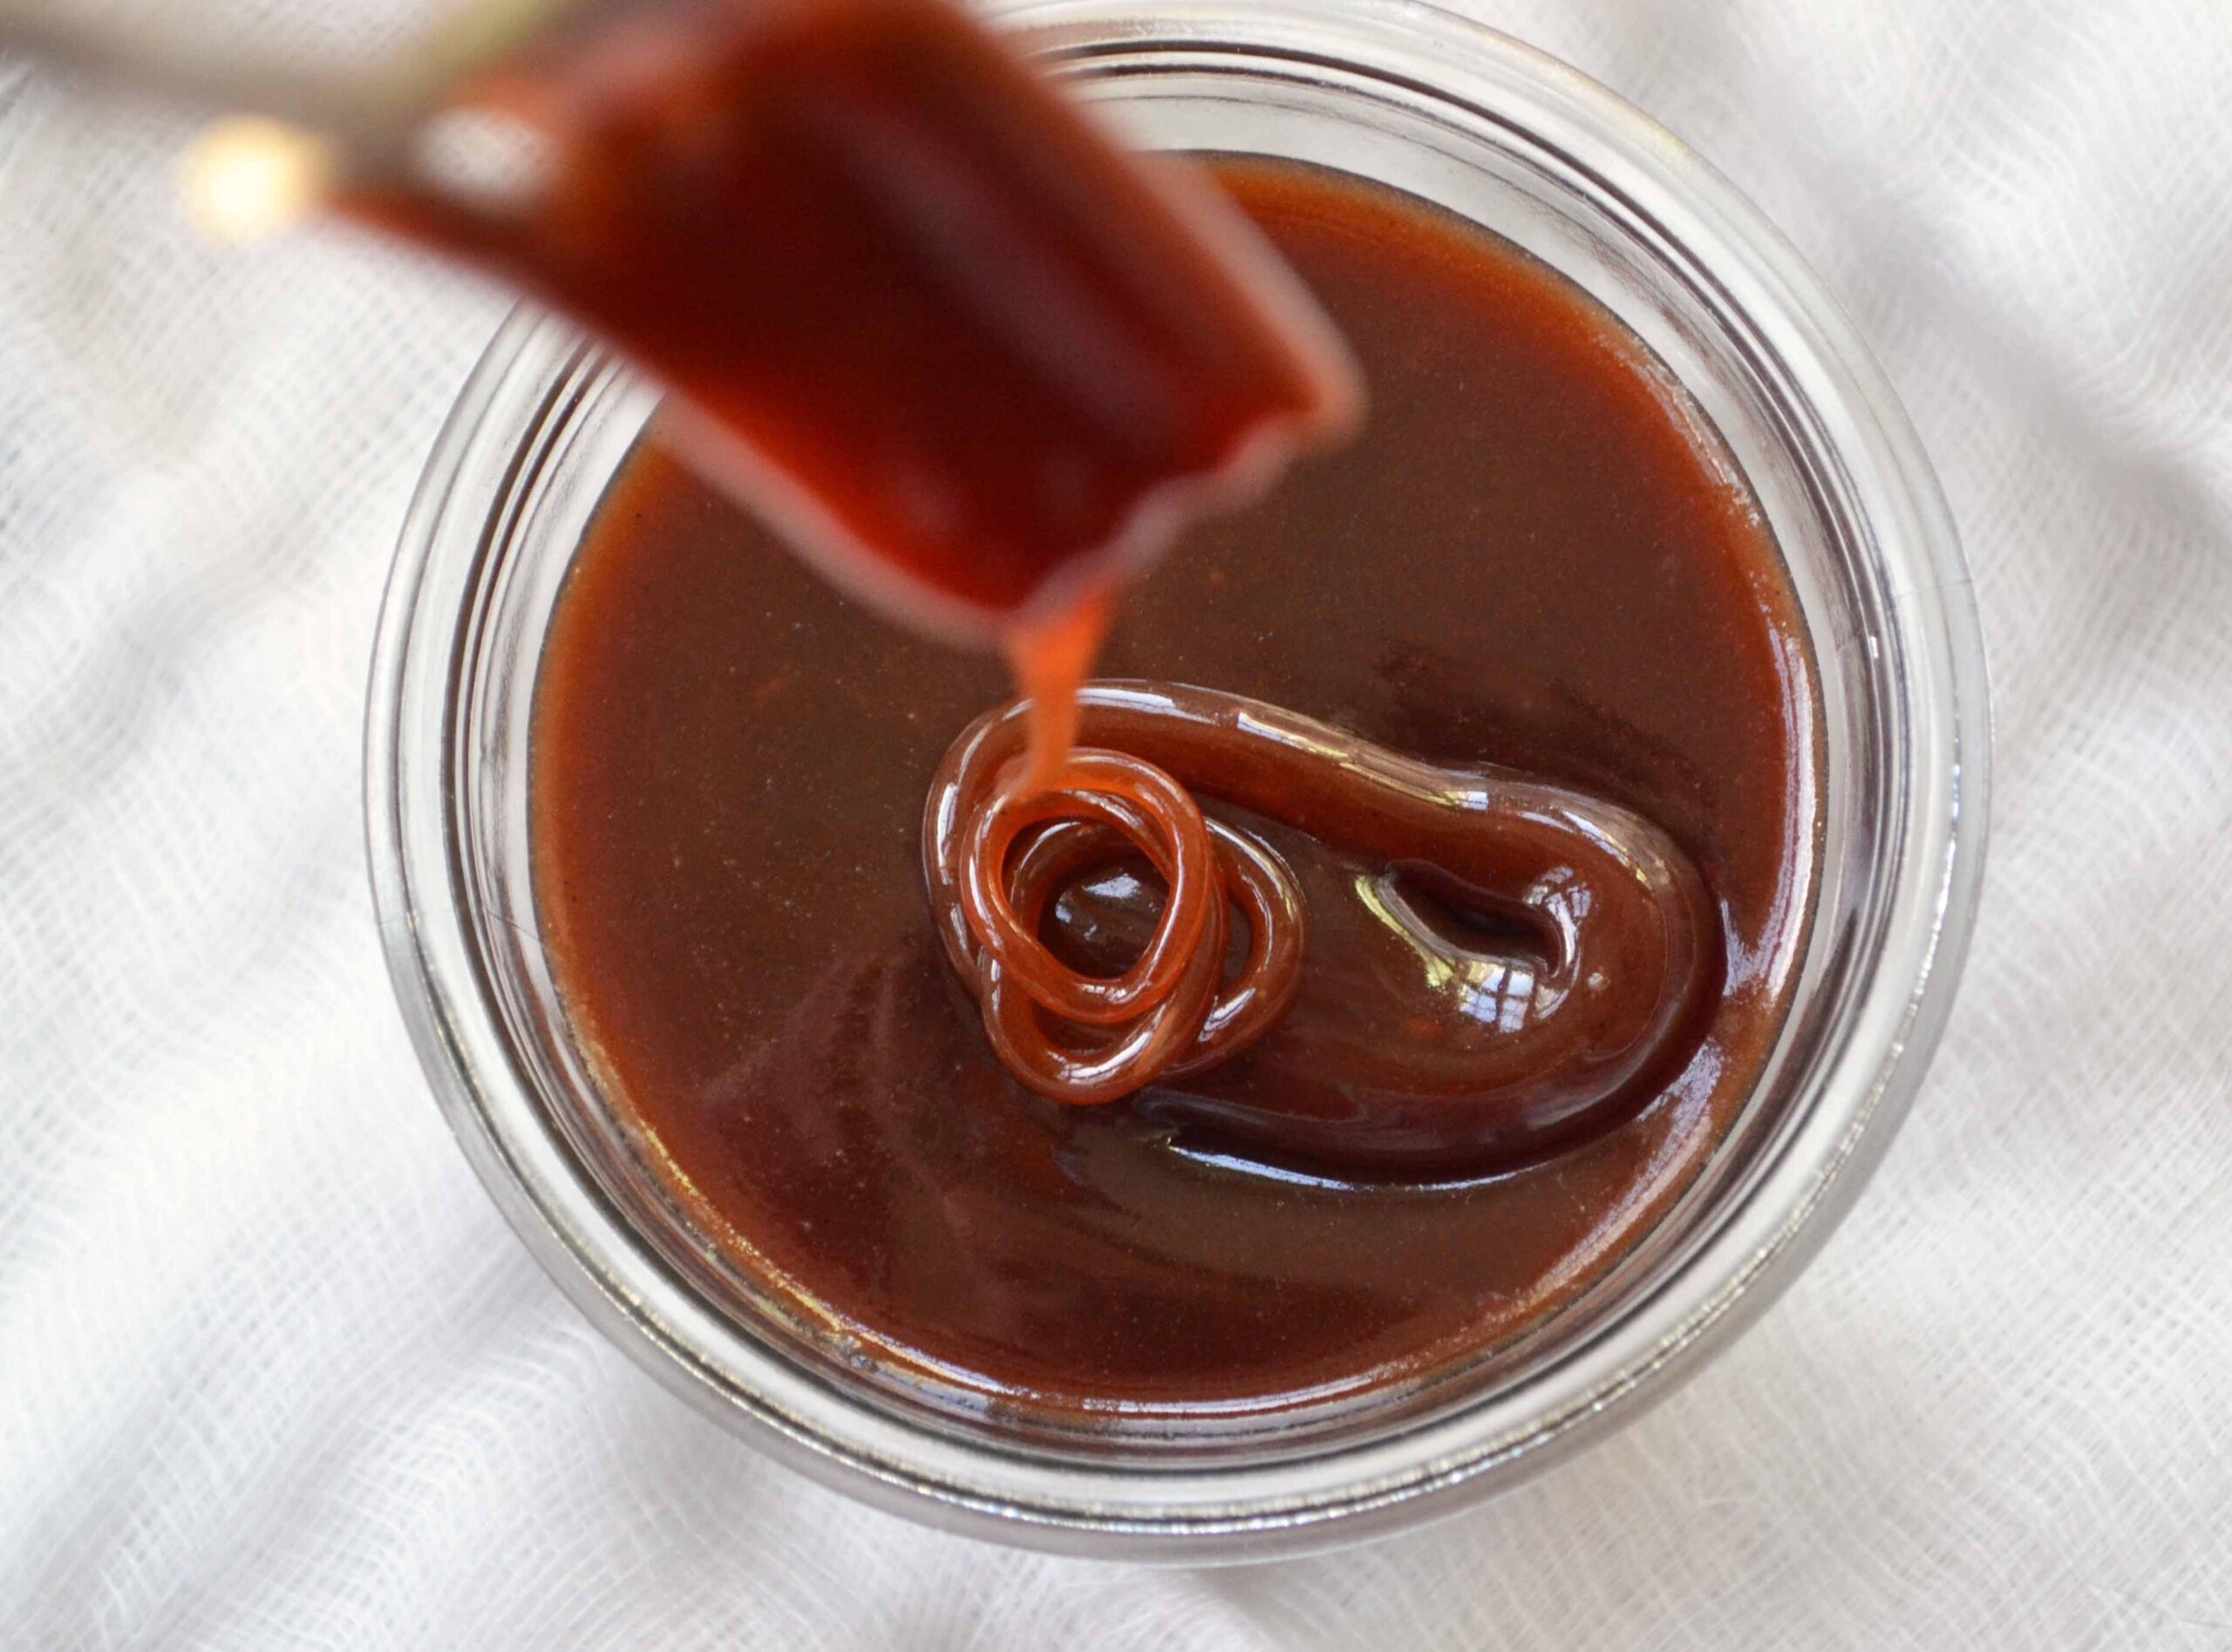  With just five simple ingredients, this vegan caramel sauce recipe is a cinch to whip up.